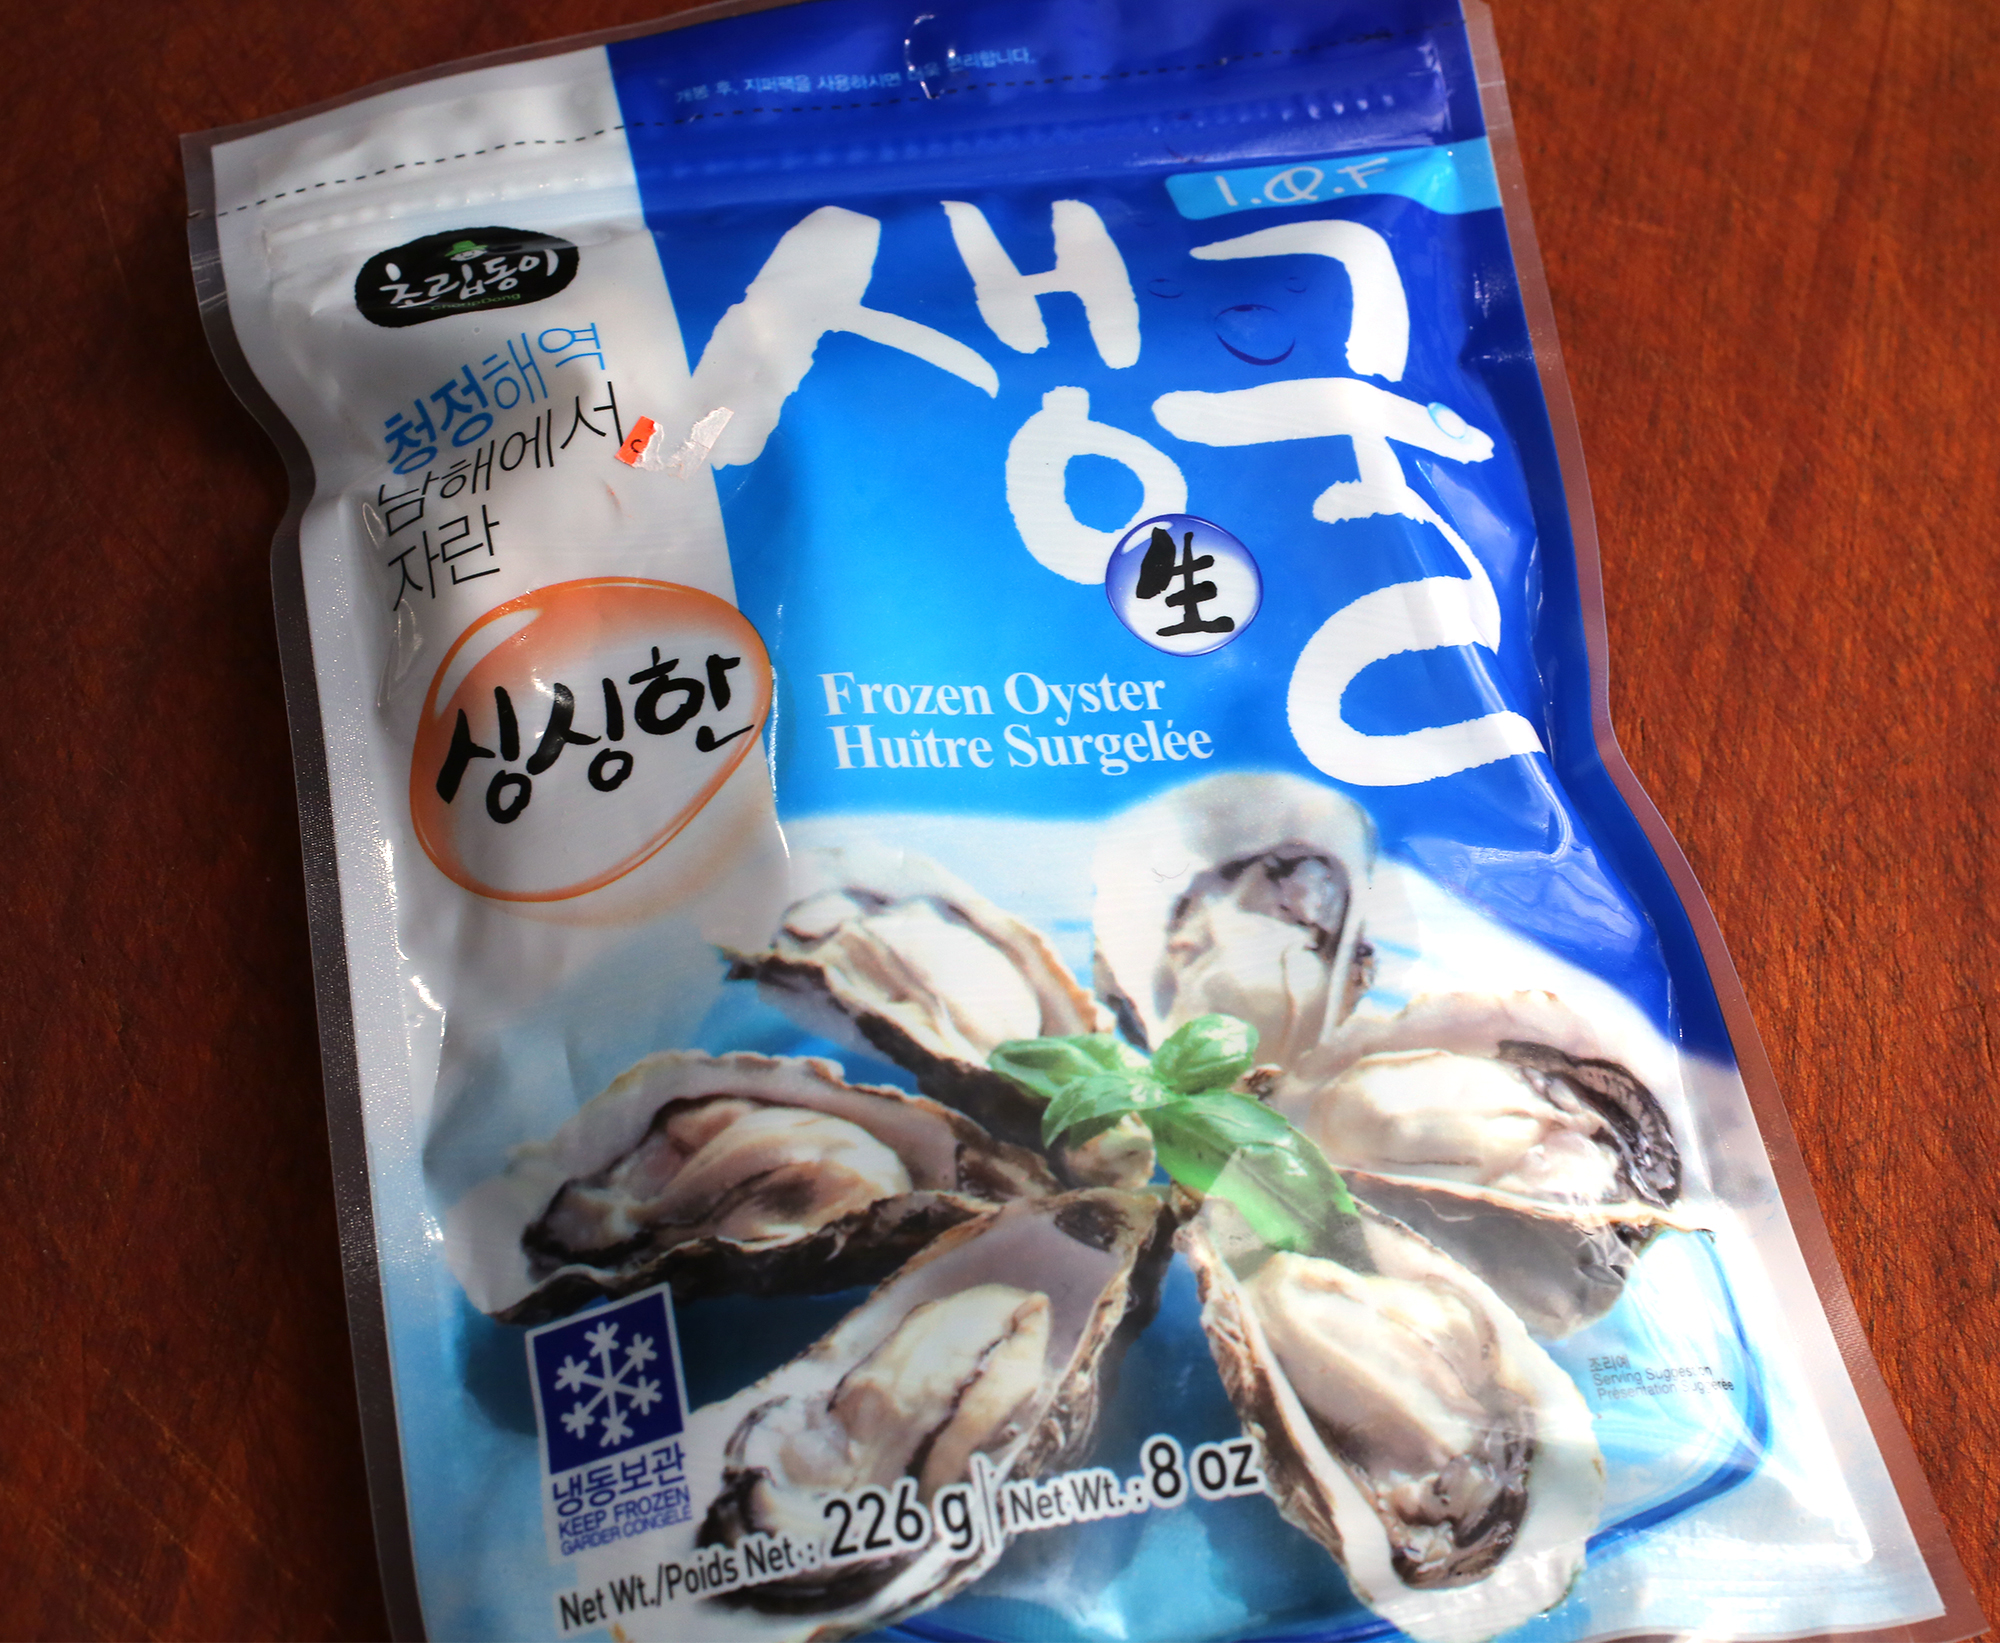 A package of frozen oysters